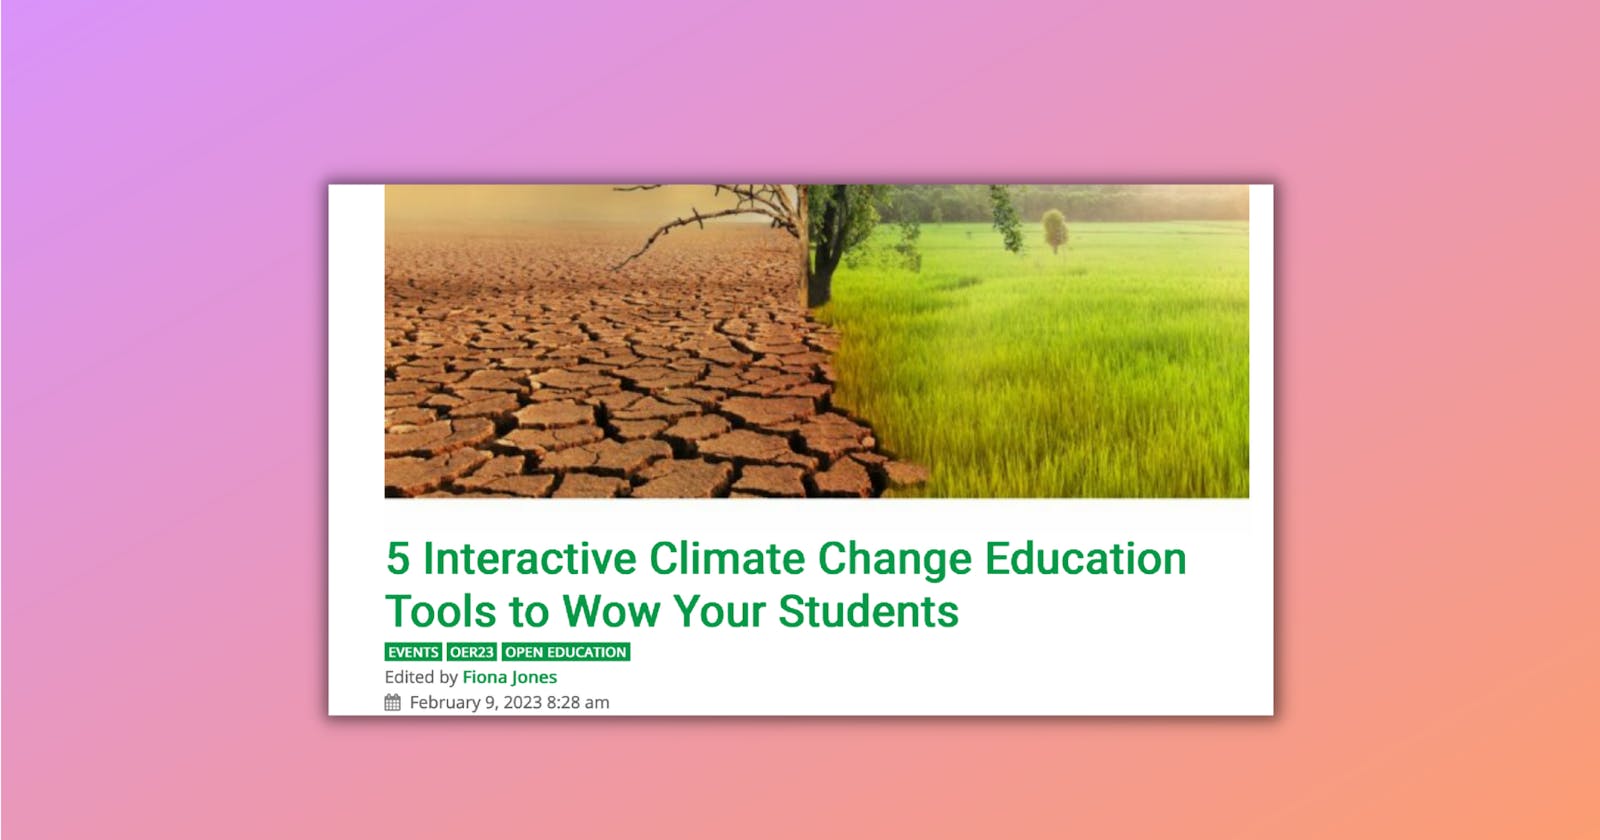 5 Interactive Climate Change Education Tools to Wow Your Students (External link)